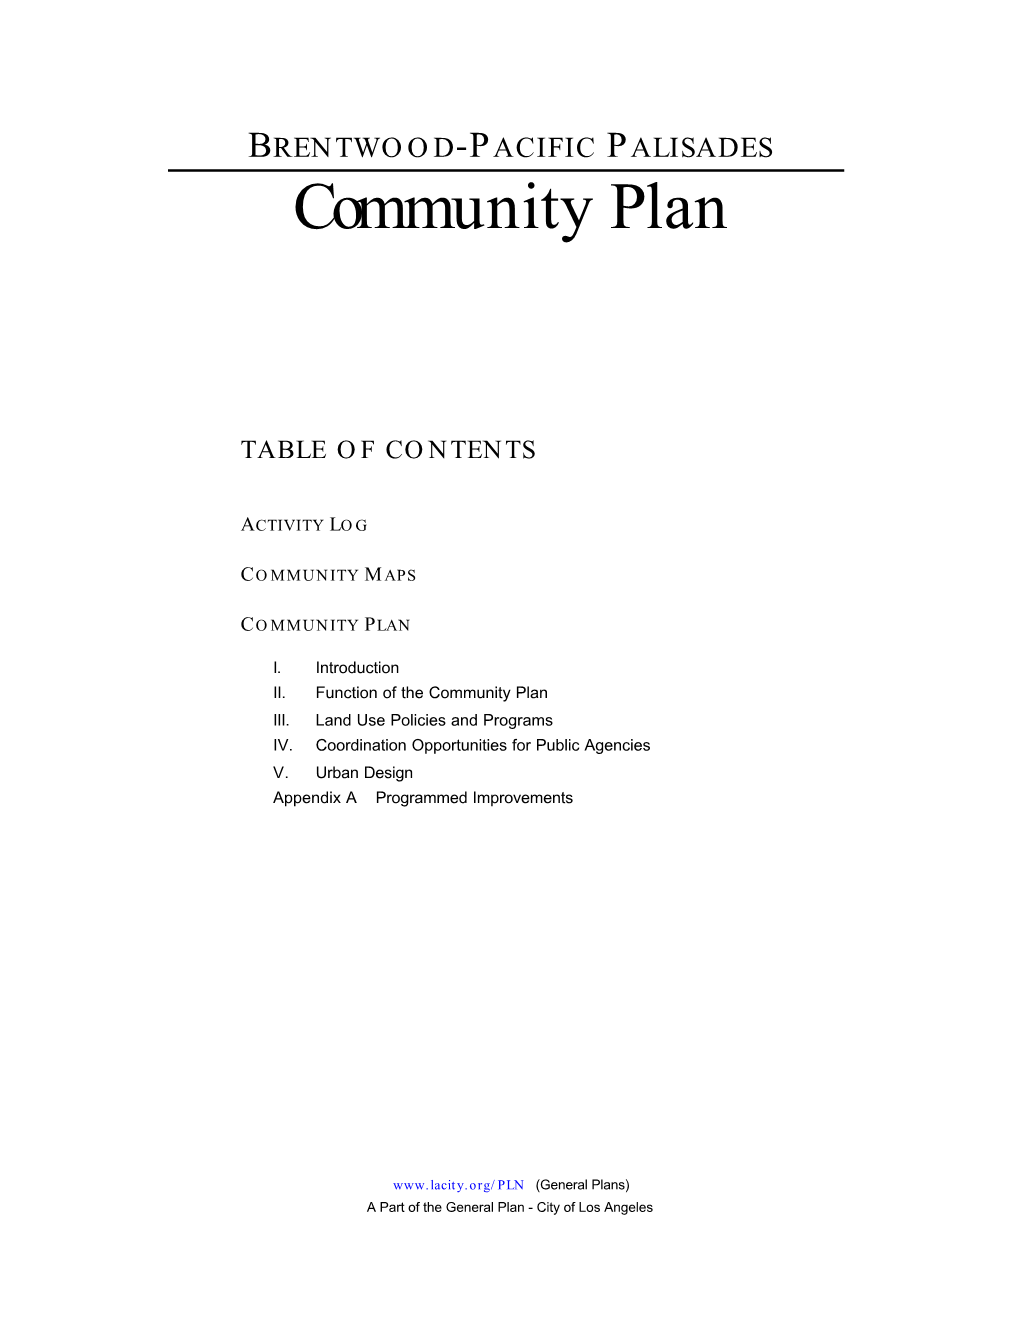 BRENTWOOD-PACIFIC PALISADES Community Plan